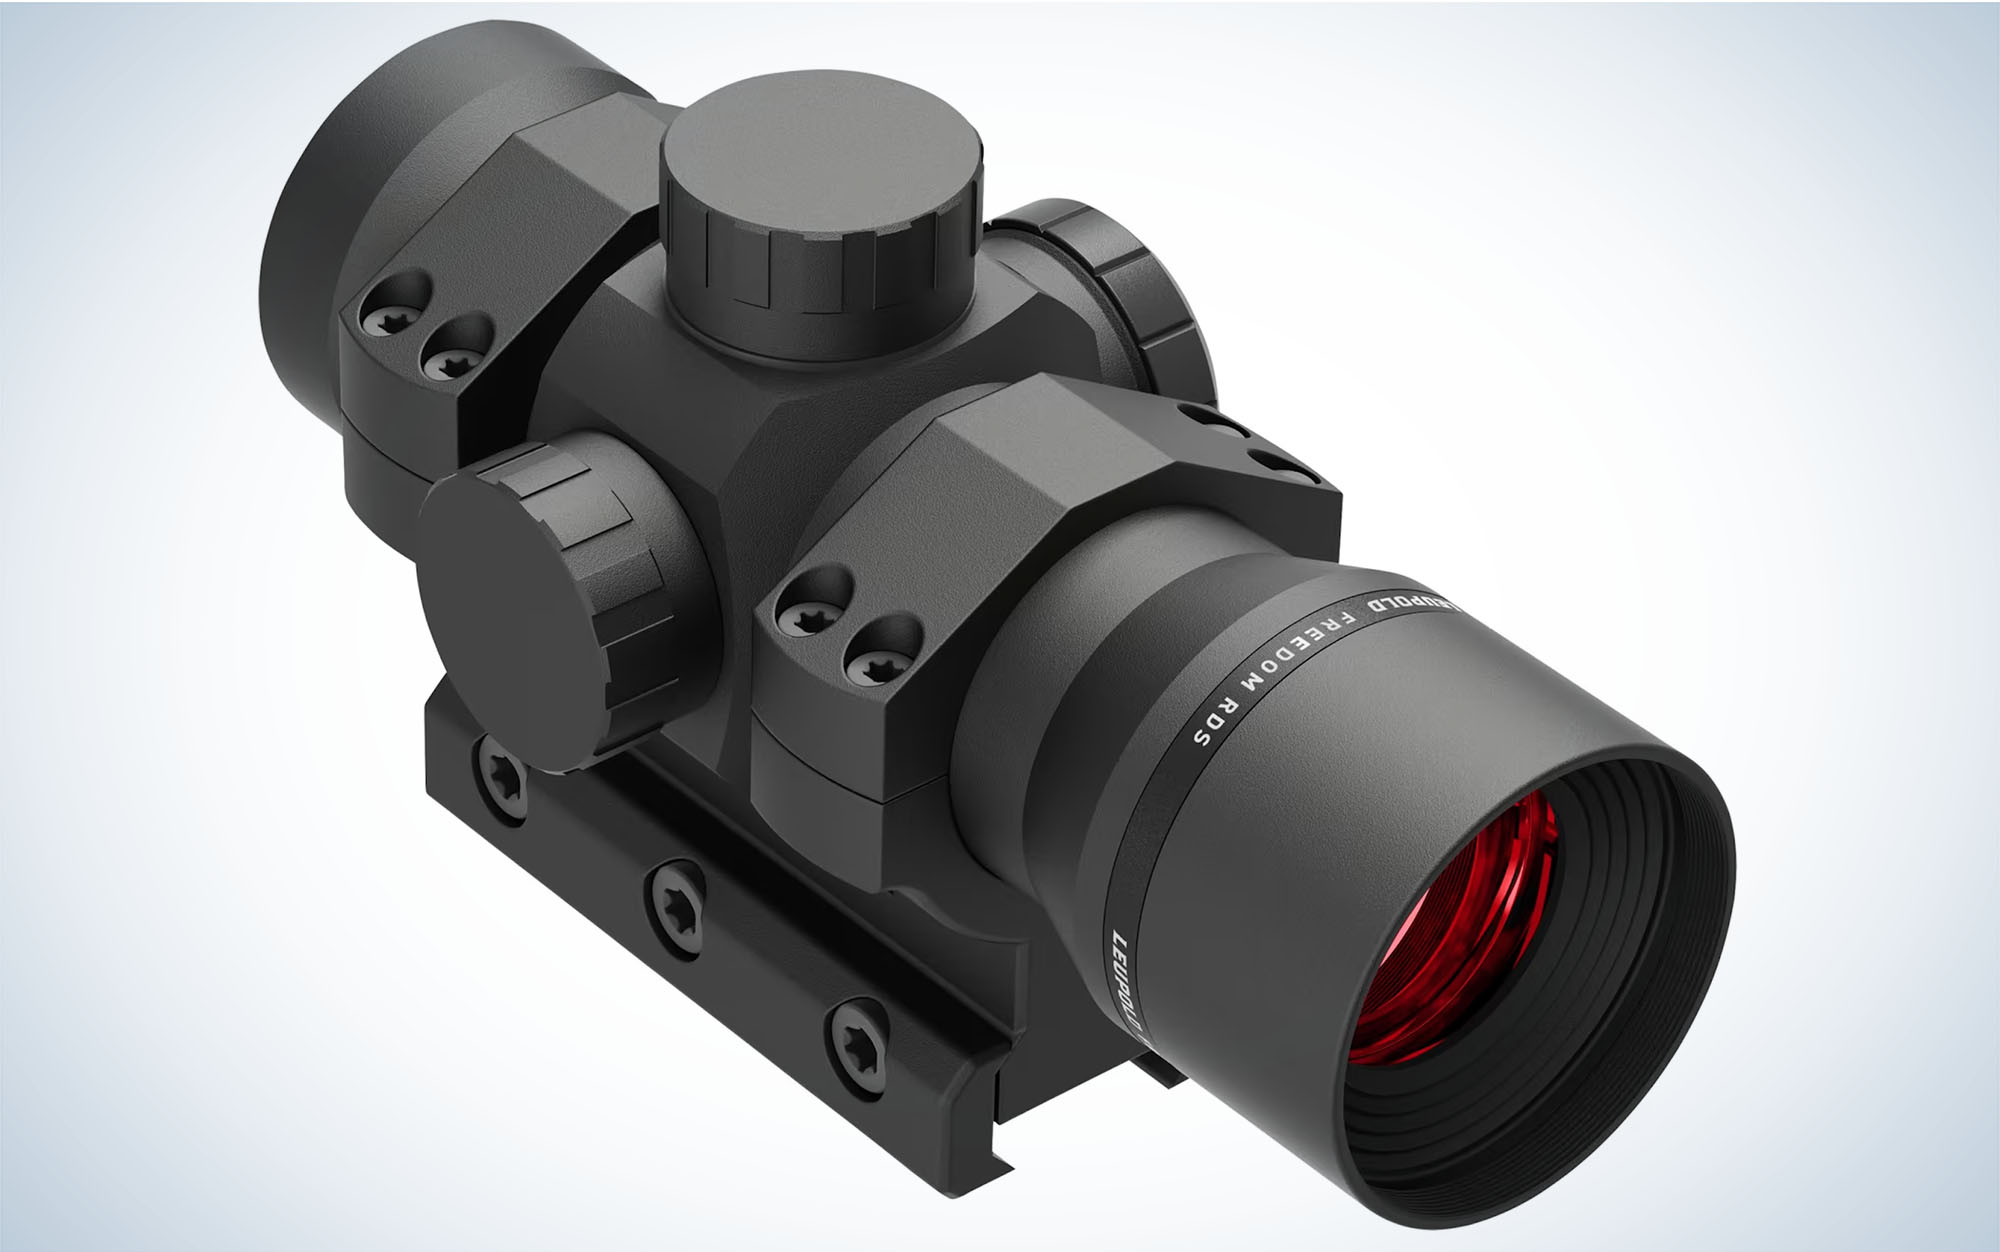 The Leupold Freedom RDS is the best red dot sight for long shots.